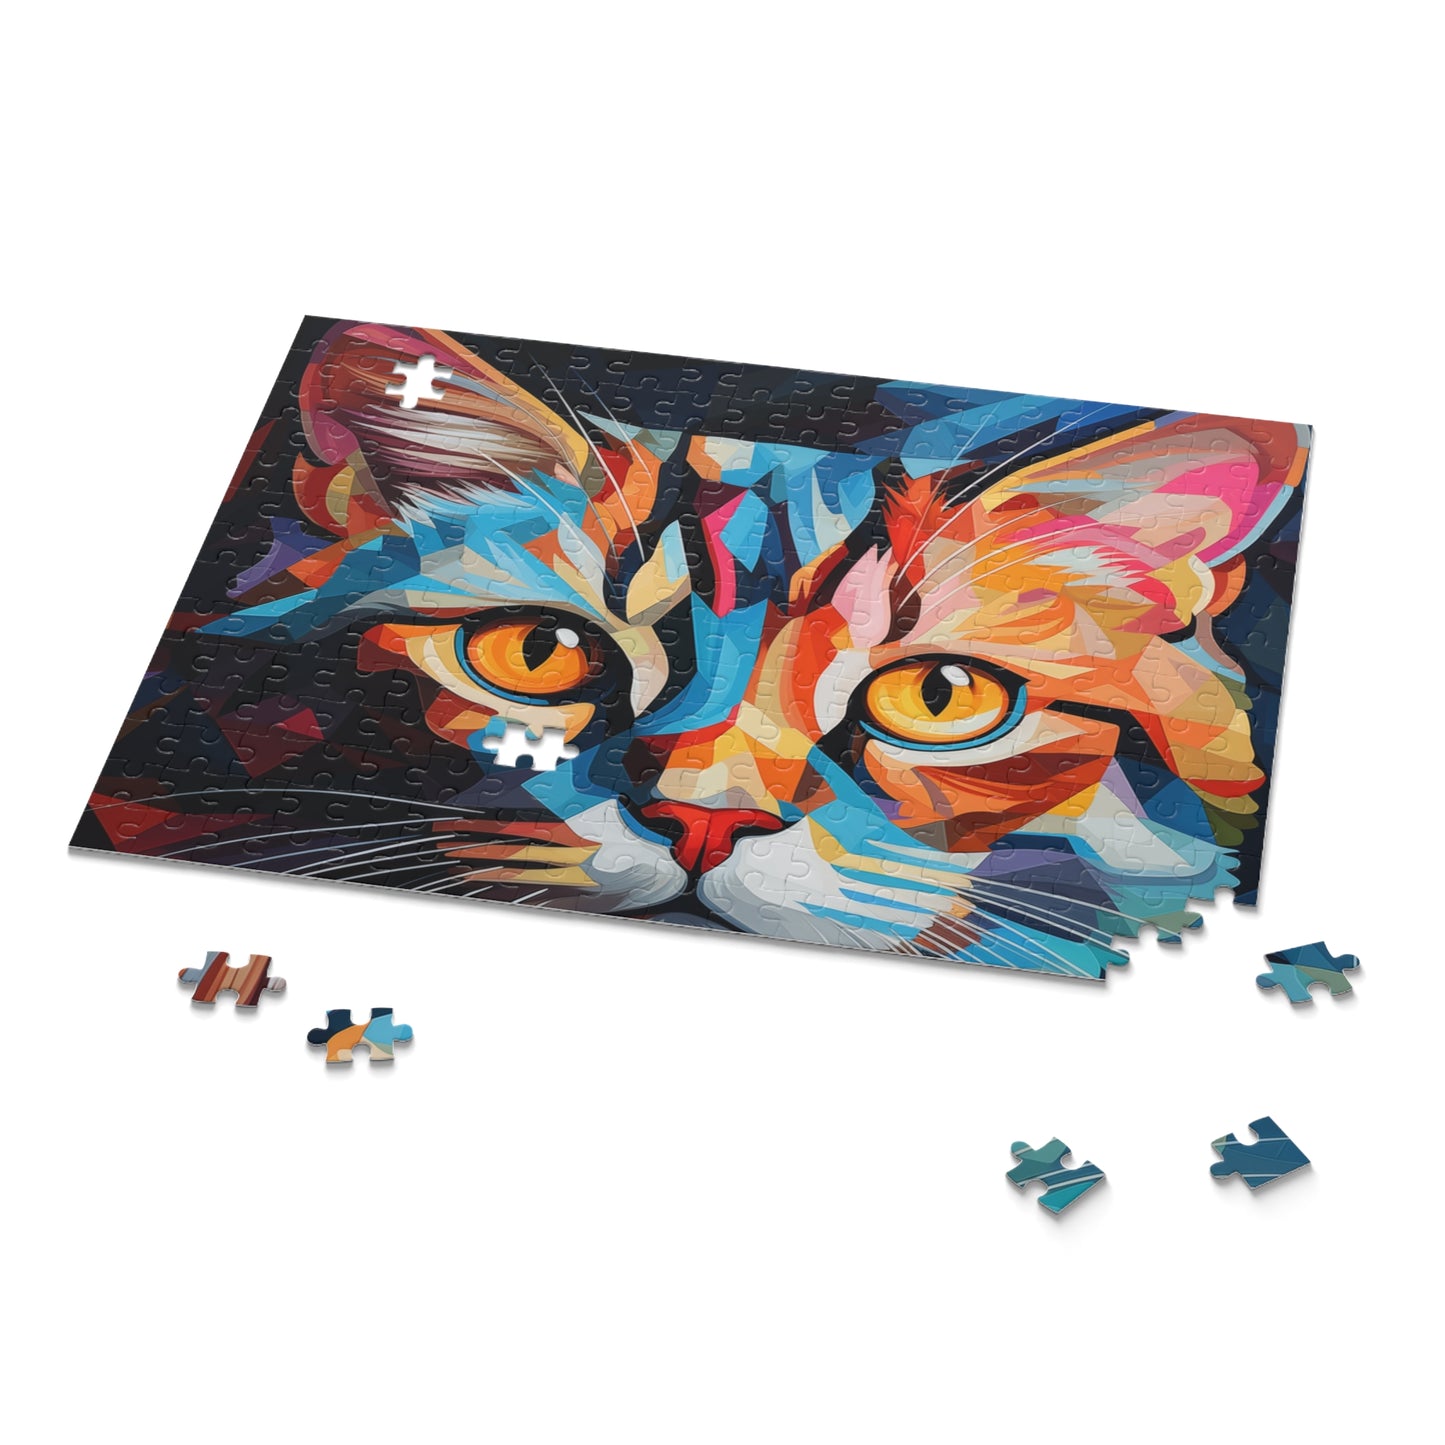 Abstract Oil Paint Colorful Cat Jigsaw Puzzle Adult Birthday Business Jigsaw Puzzle Gift for Him Funny Humorous Indoor Outdoor Game Gift For Her Online-9